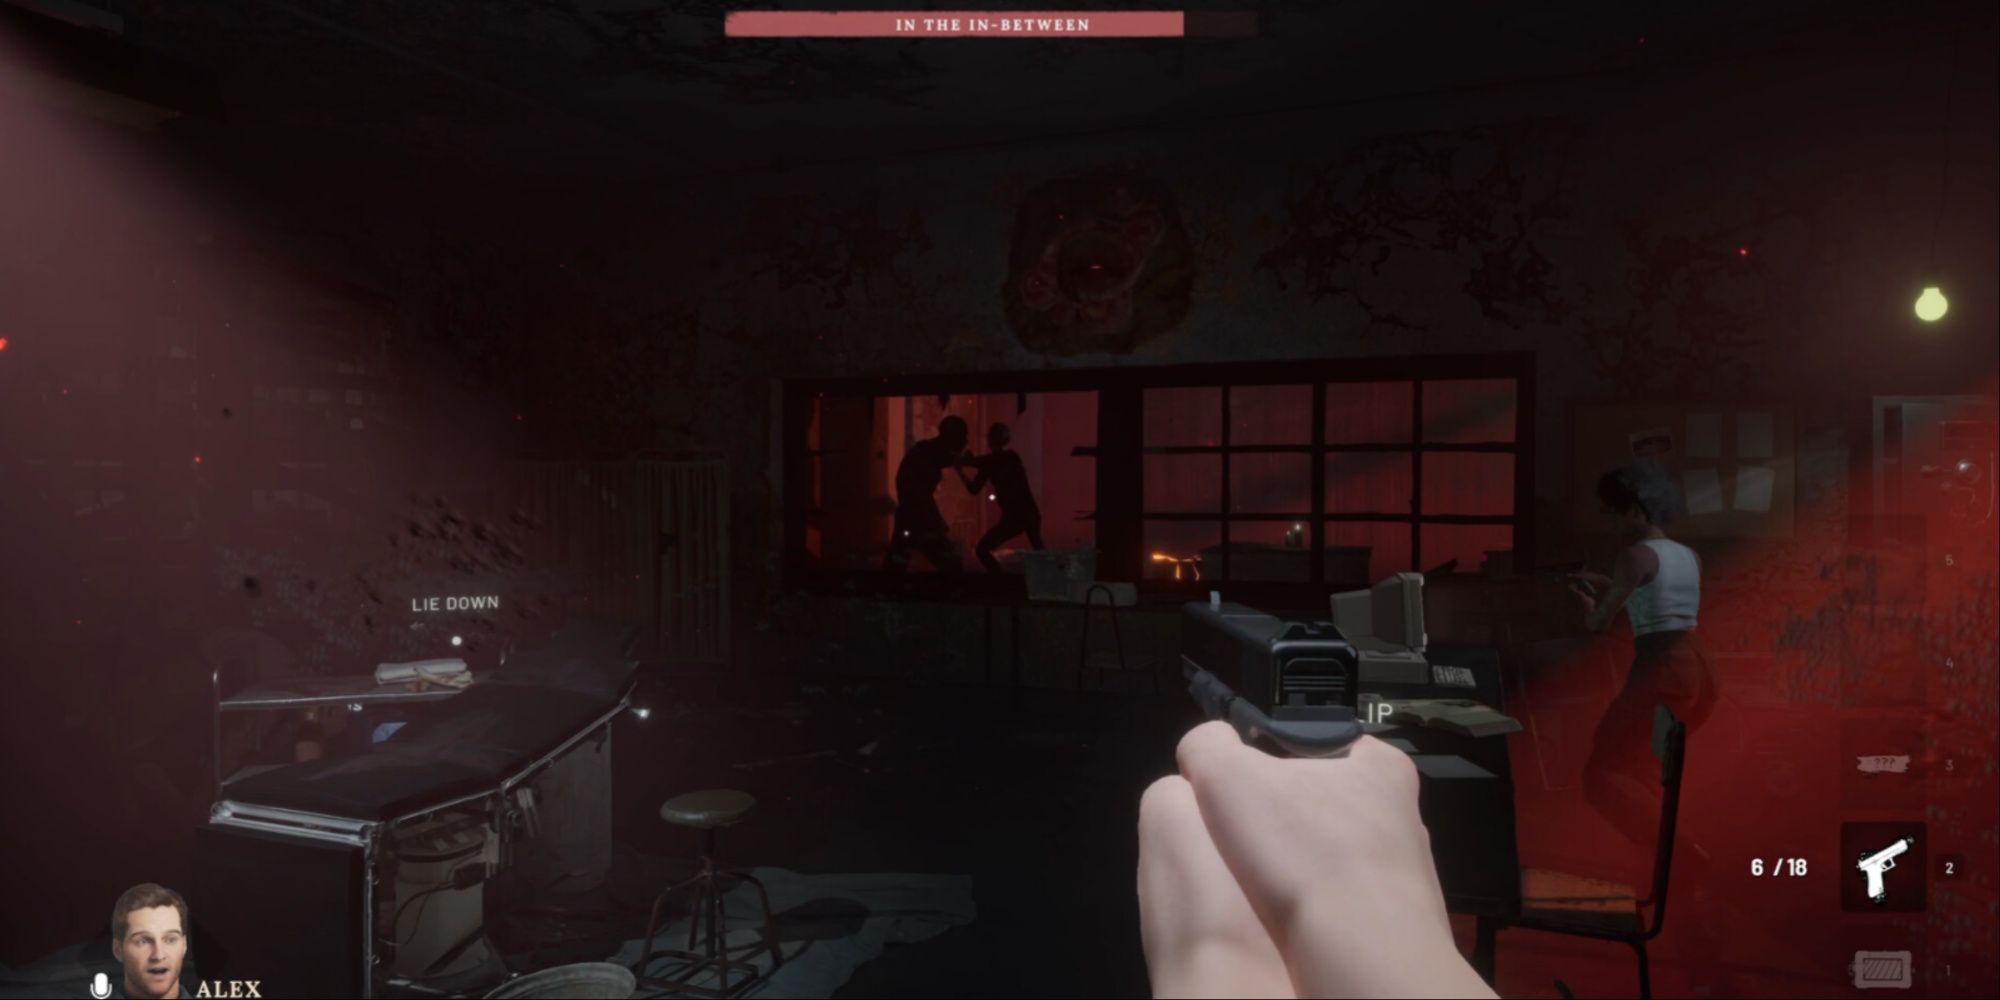 The character Alex pointing a gun at the Game Master assaulting another player through a broken window in the facility of Deceit 2.